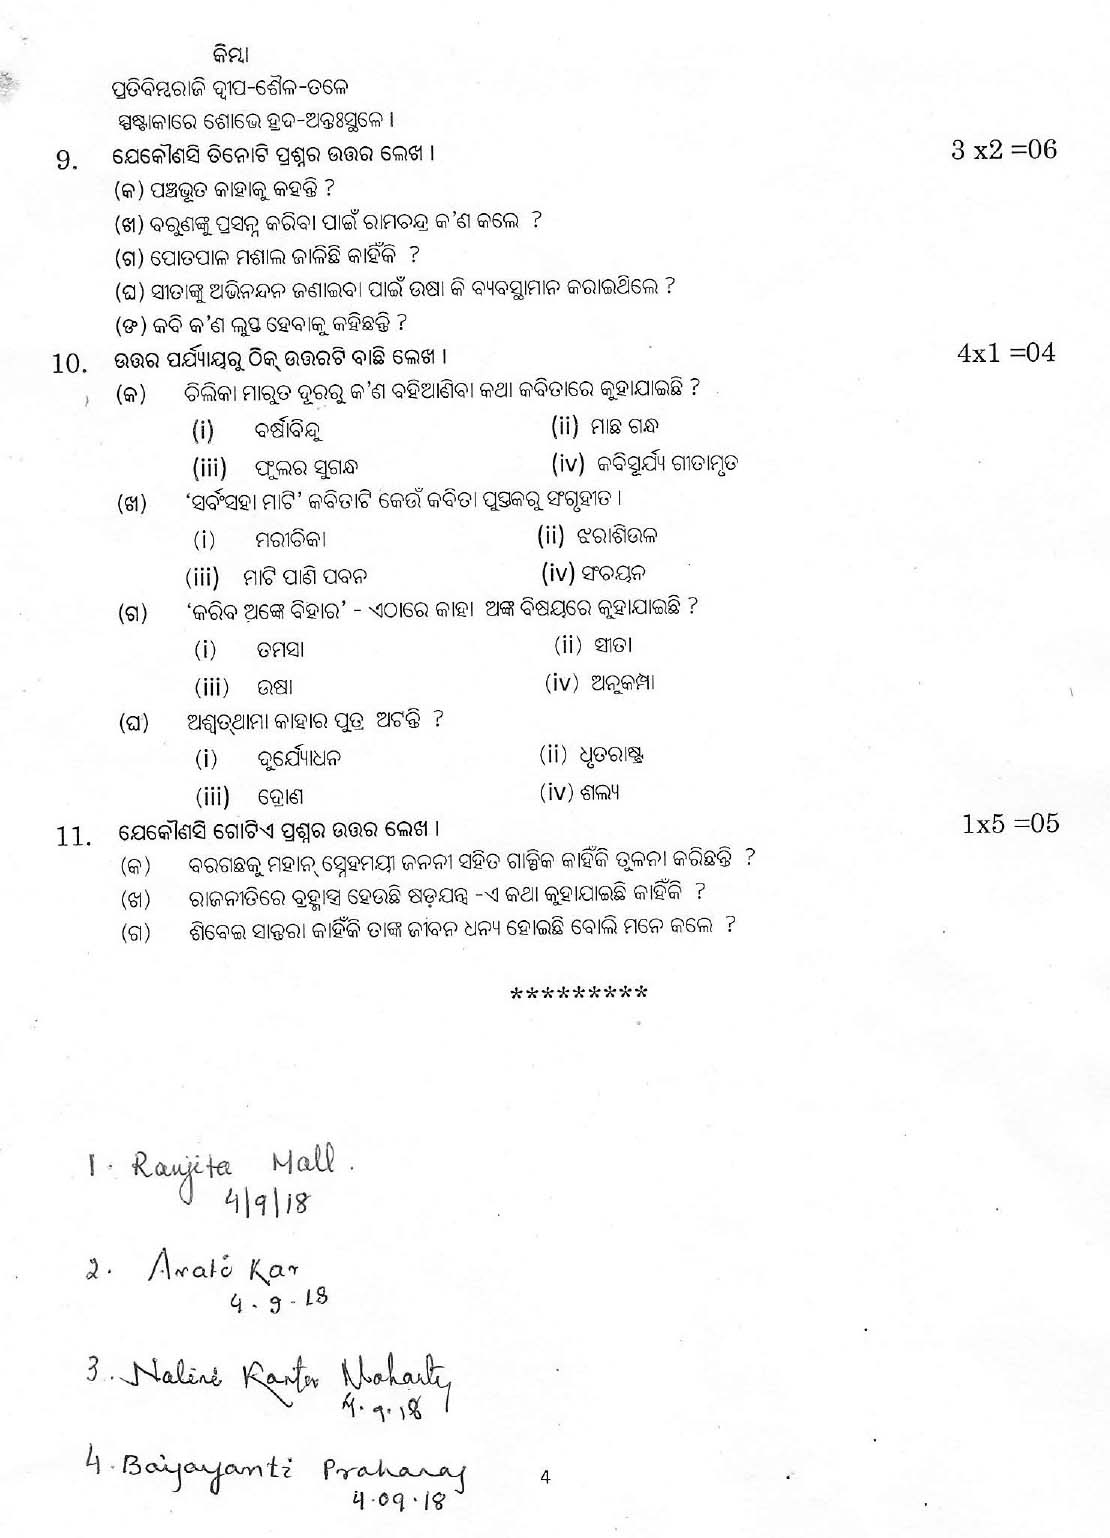 Odia CBSE Class X Sample Question Paper 2018-19 - Image 4